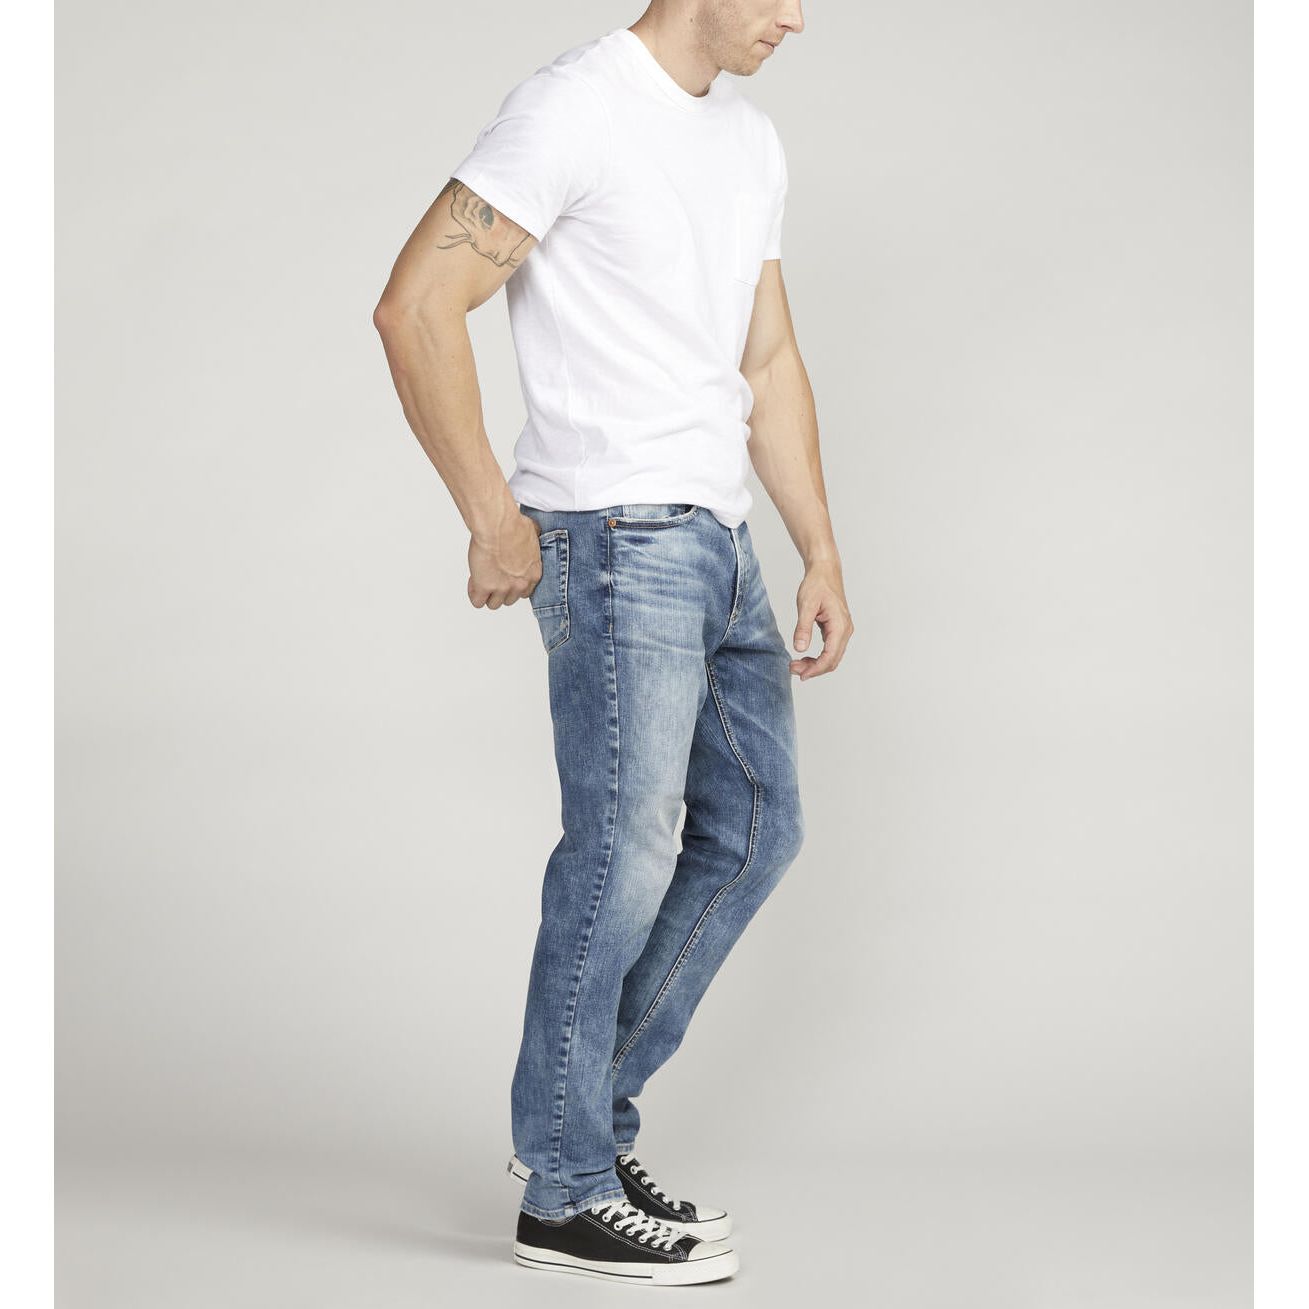 Silver Jeans - Risto Athletic Fit Skinny Jeans in M63120SDK399